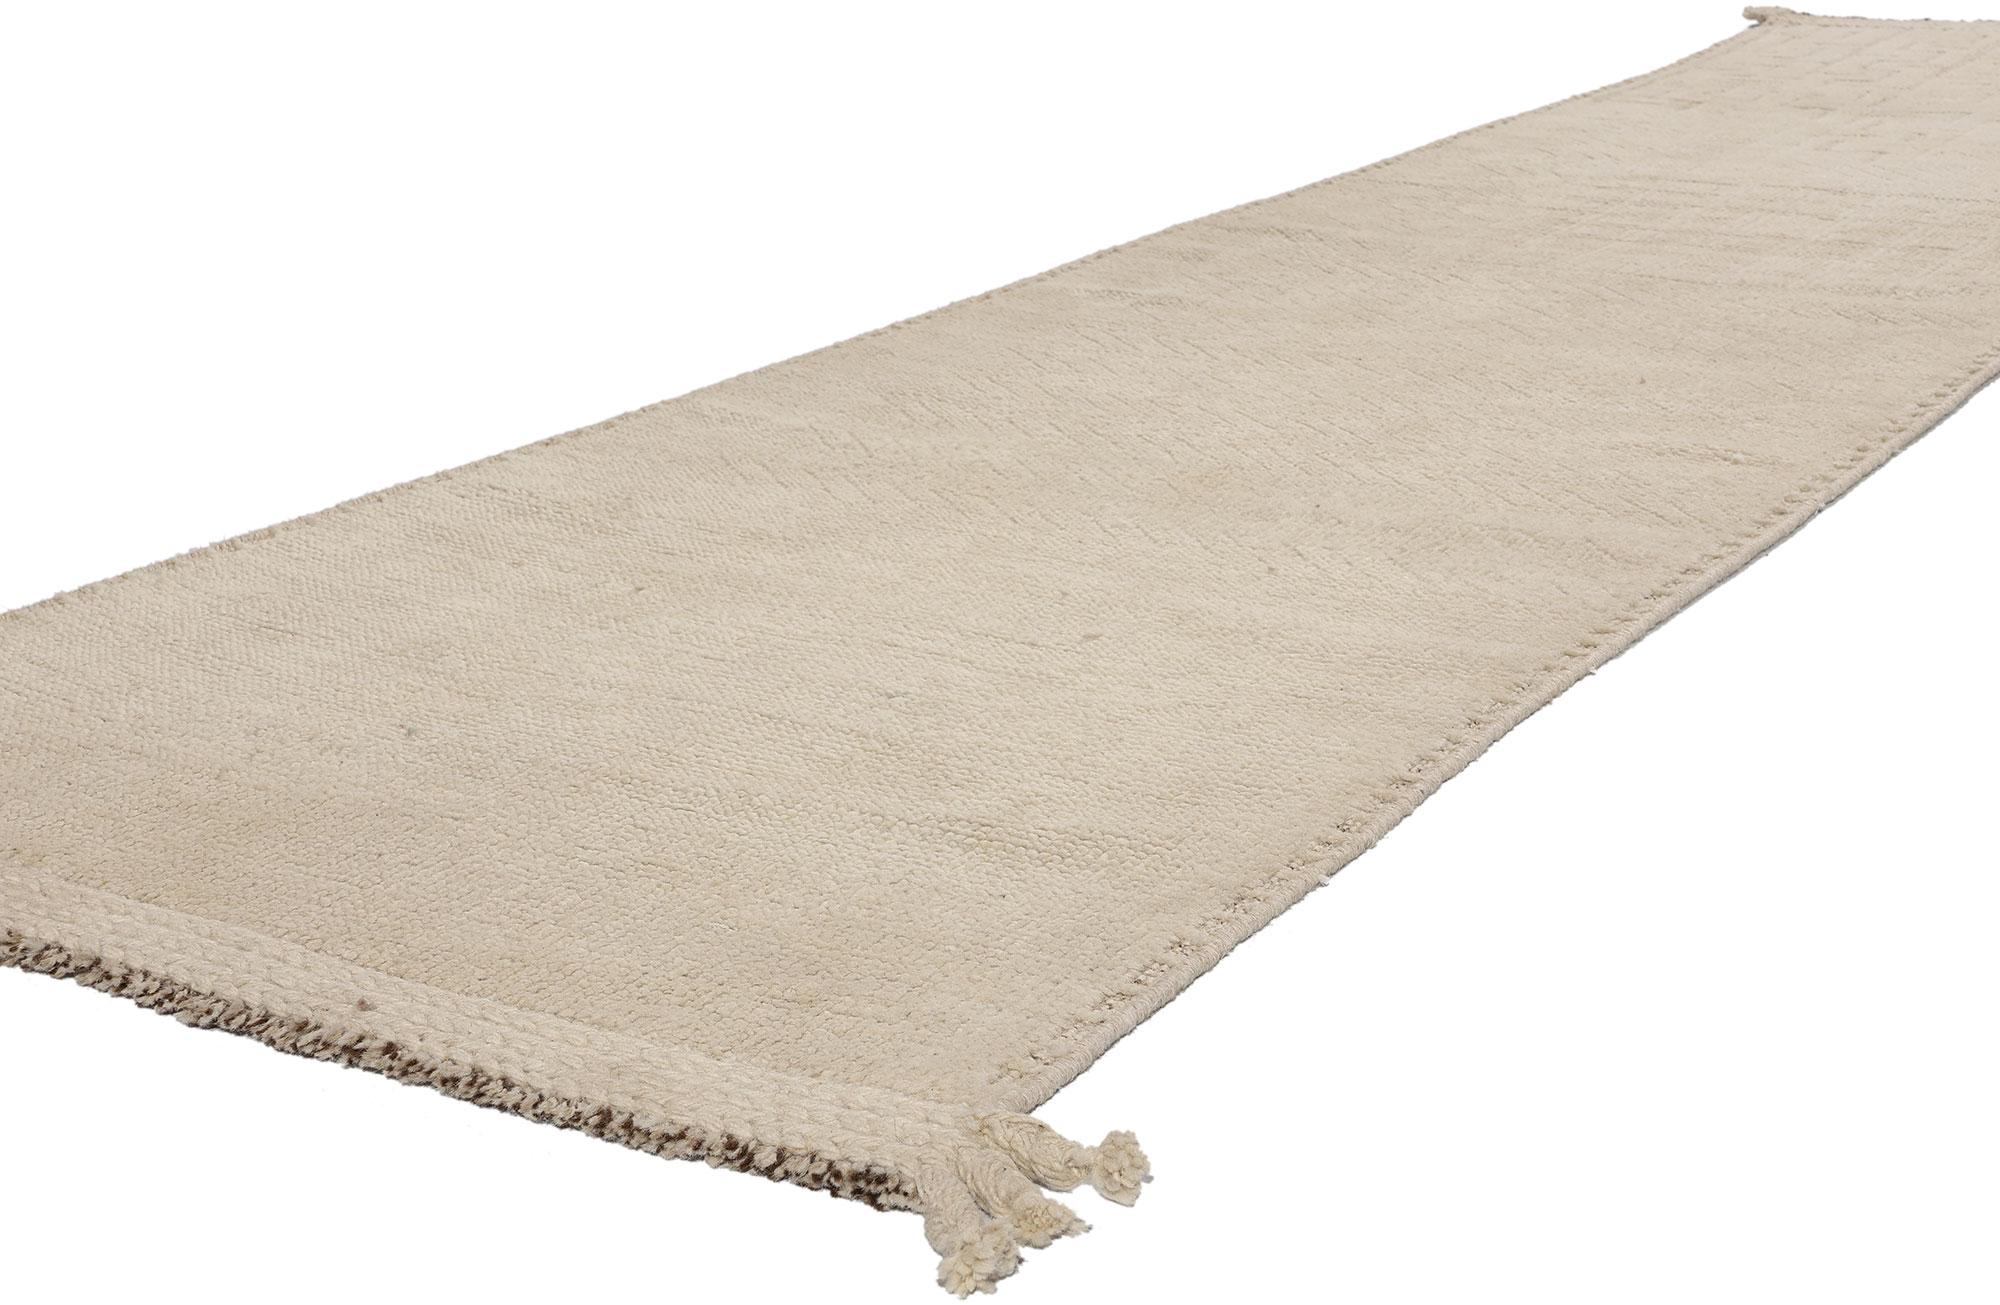 81075 Organic Modern Boho Moroccan Rug Runner, 02'11 x 12'02. Dive deep into the enchanting essence of minimalist bohemian design as you enhance your space with this hand-knotted wool organic modern Boho Moroccan rug runner. Crafted with meticulous